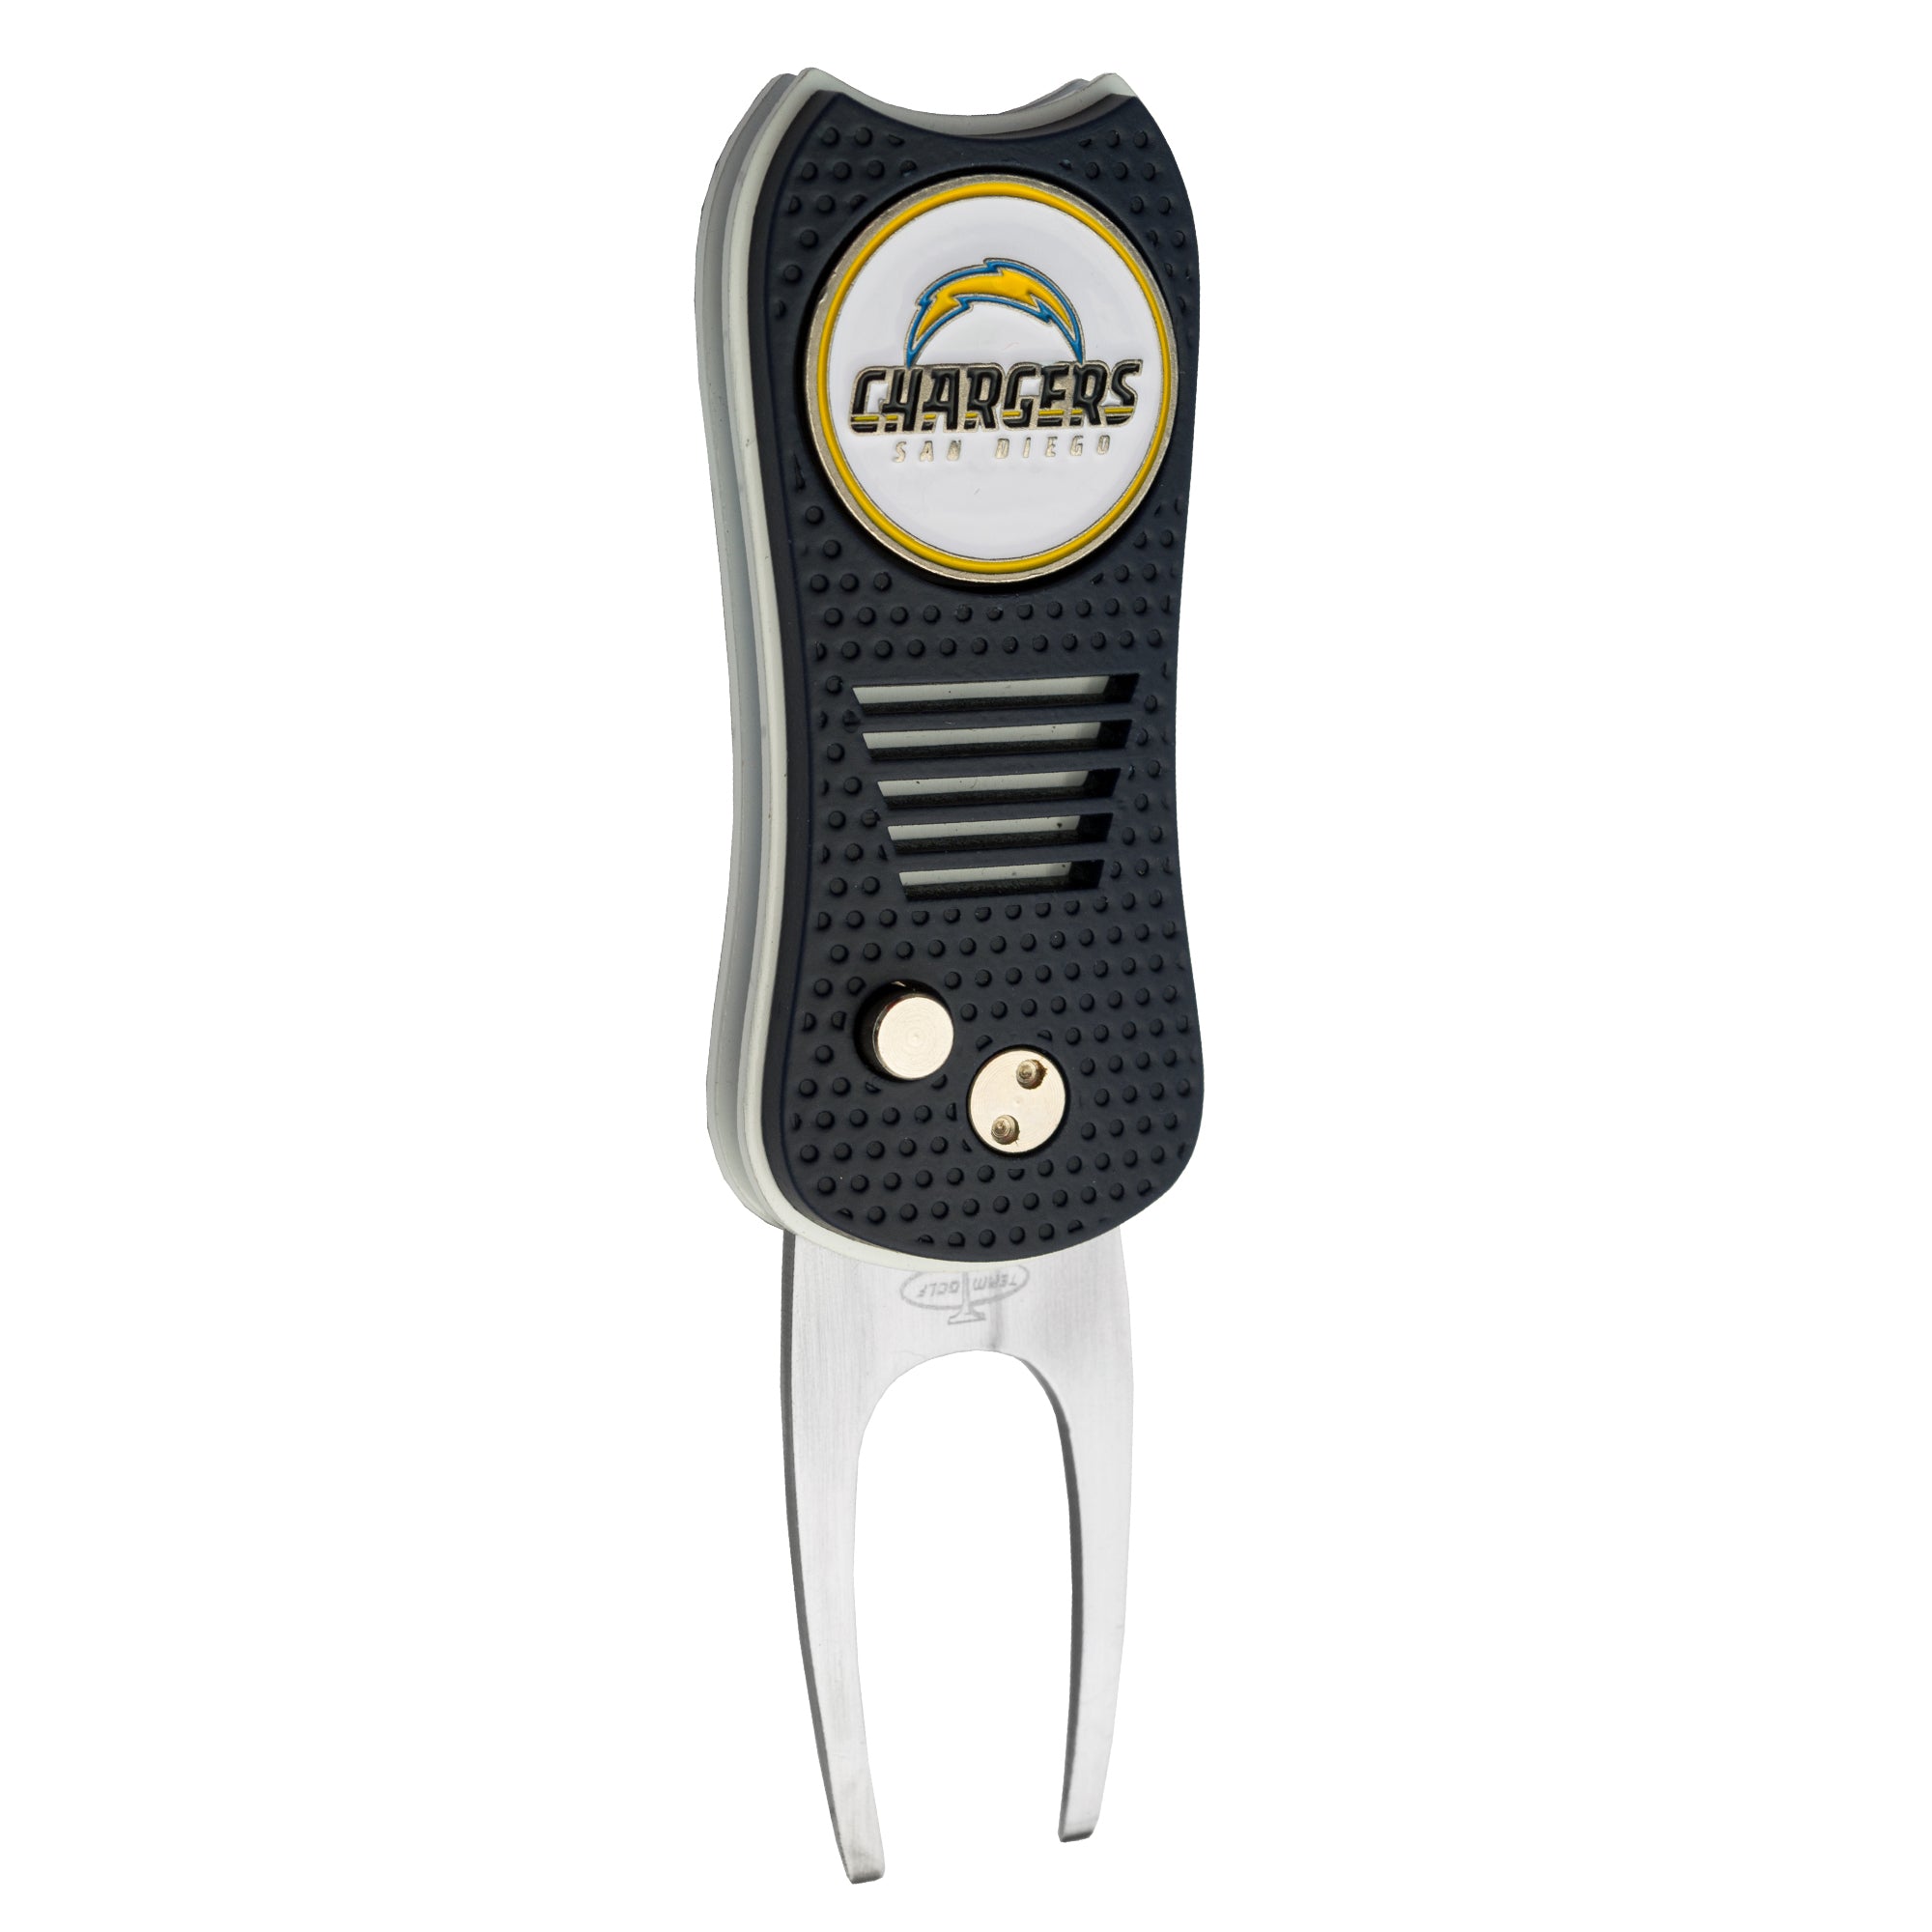 Los Angeles Chargers Switchblade Divot Tool